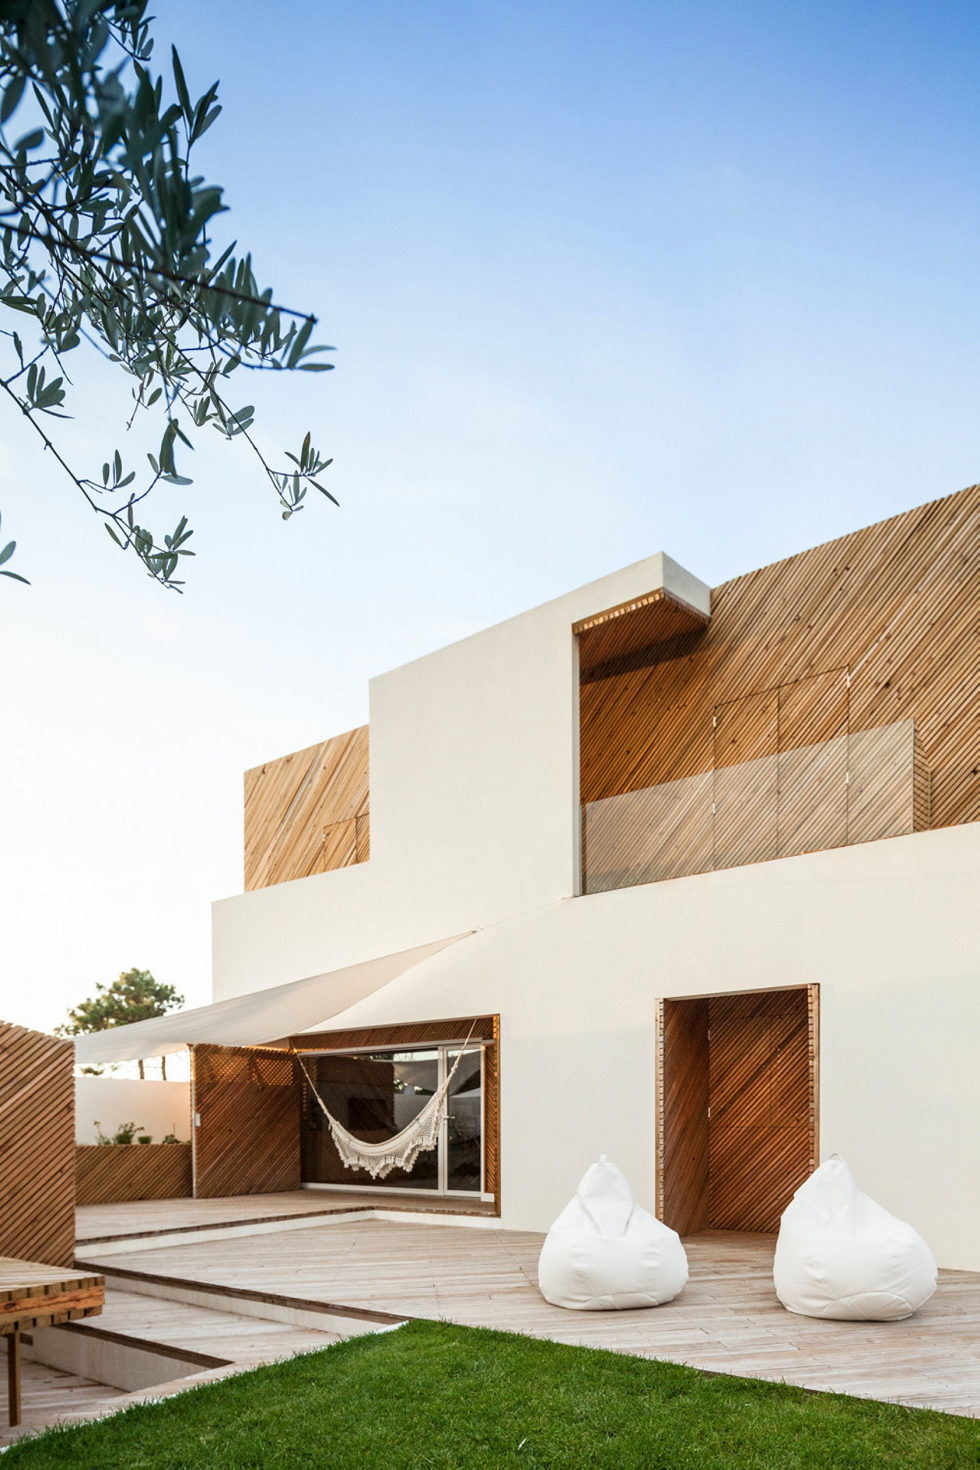 SilverWoodHouse Project In Portugal From 3r Ernesto Pereira Studio 14